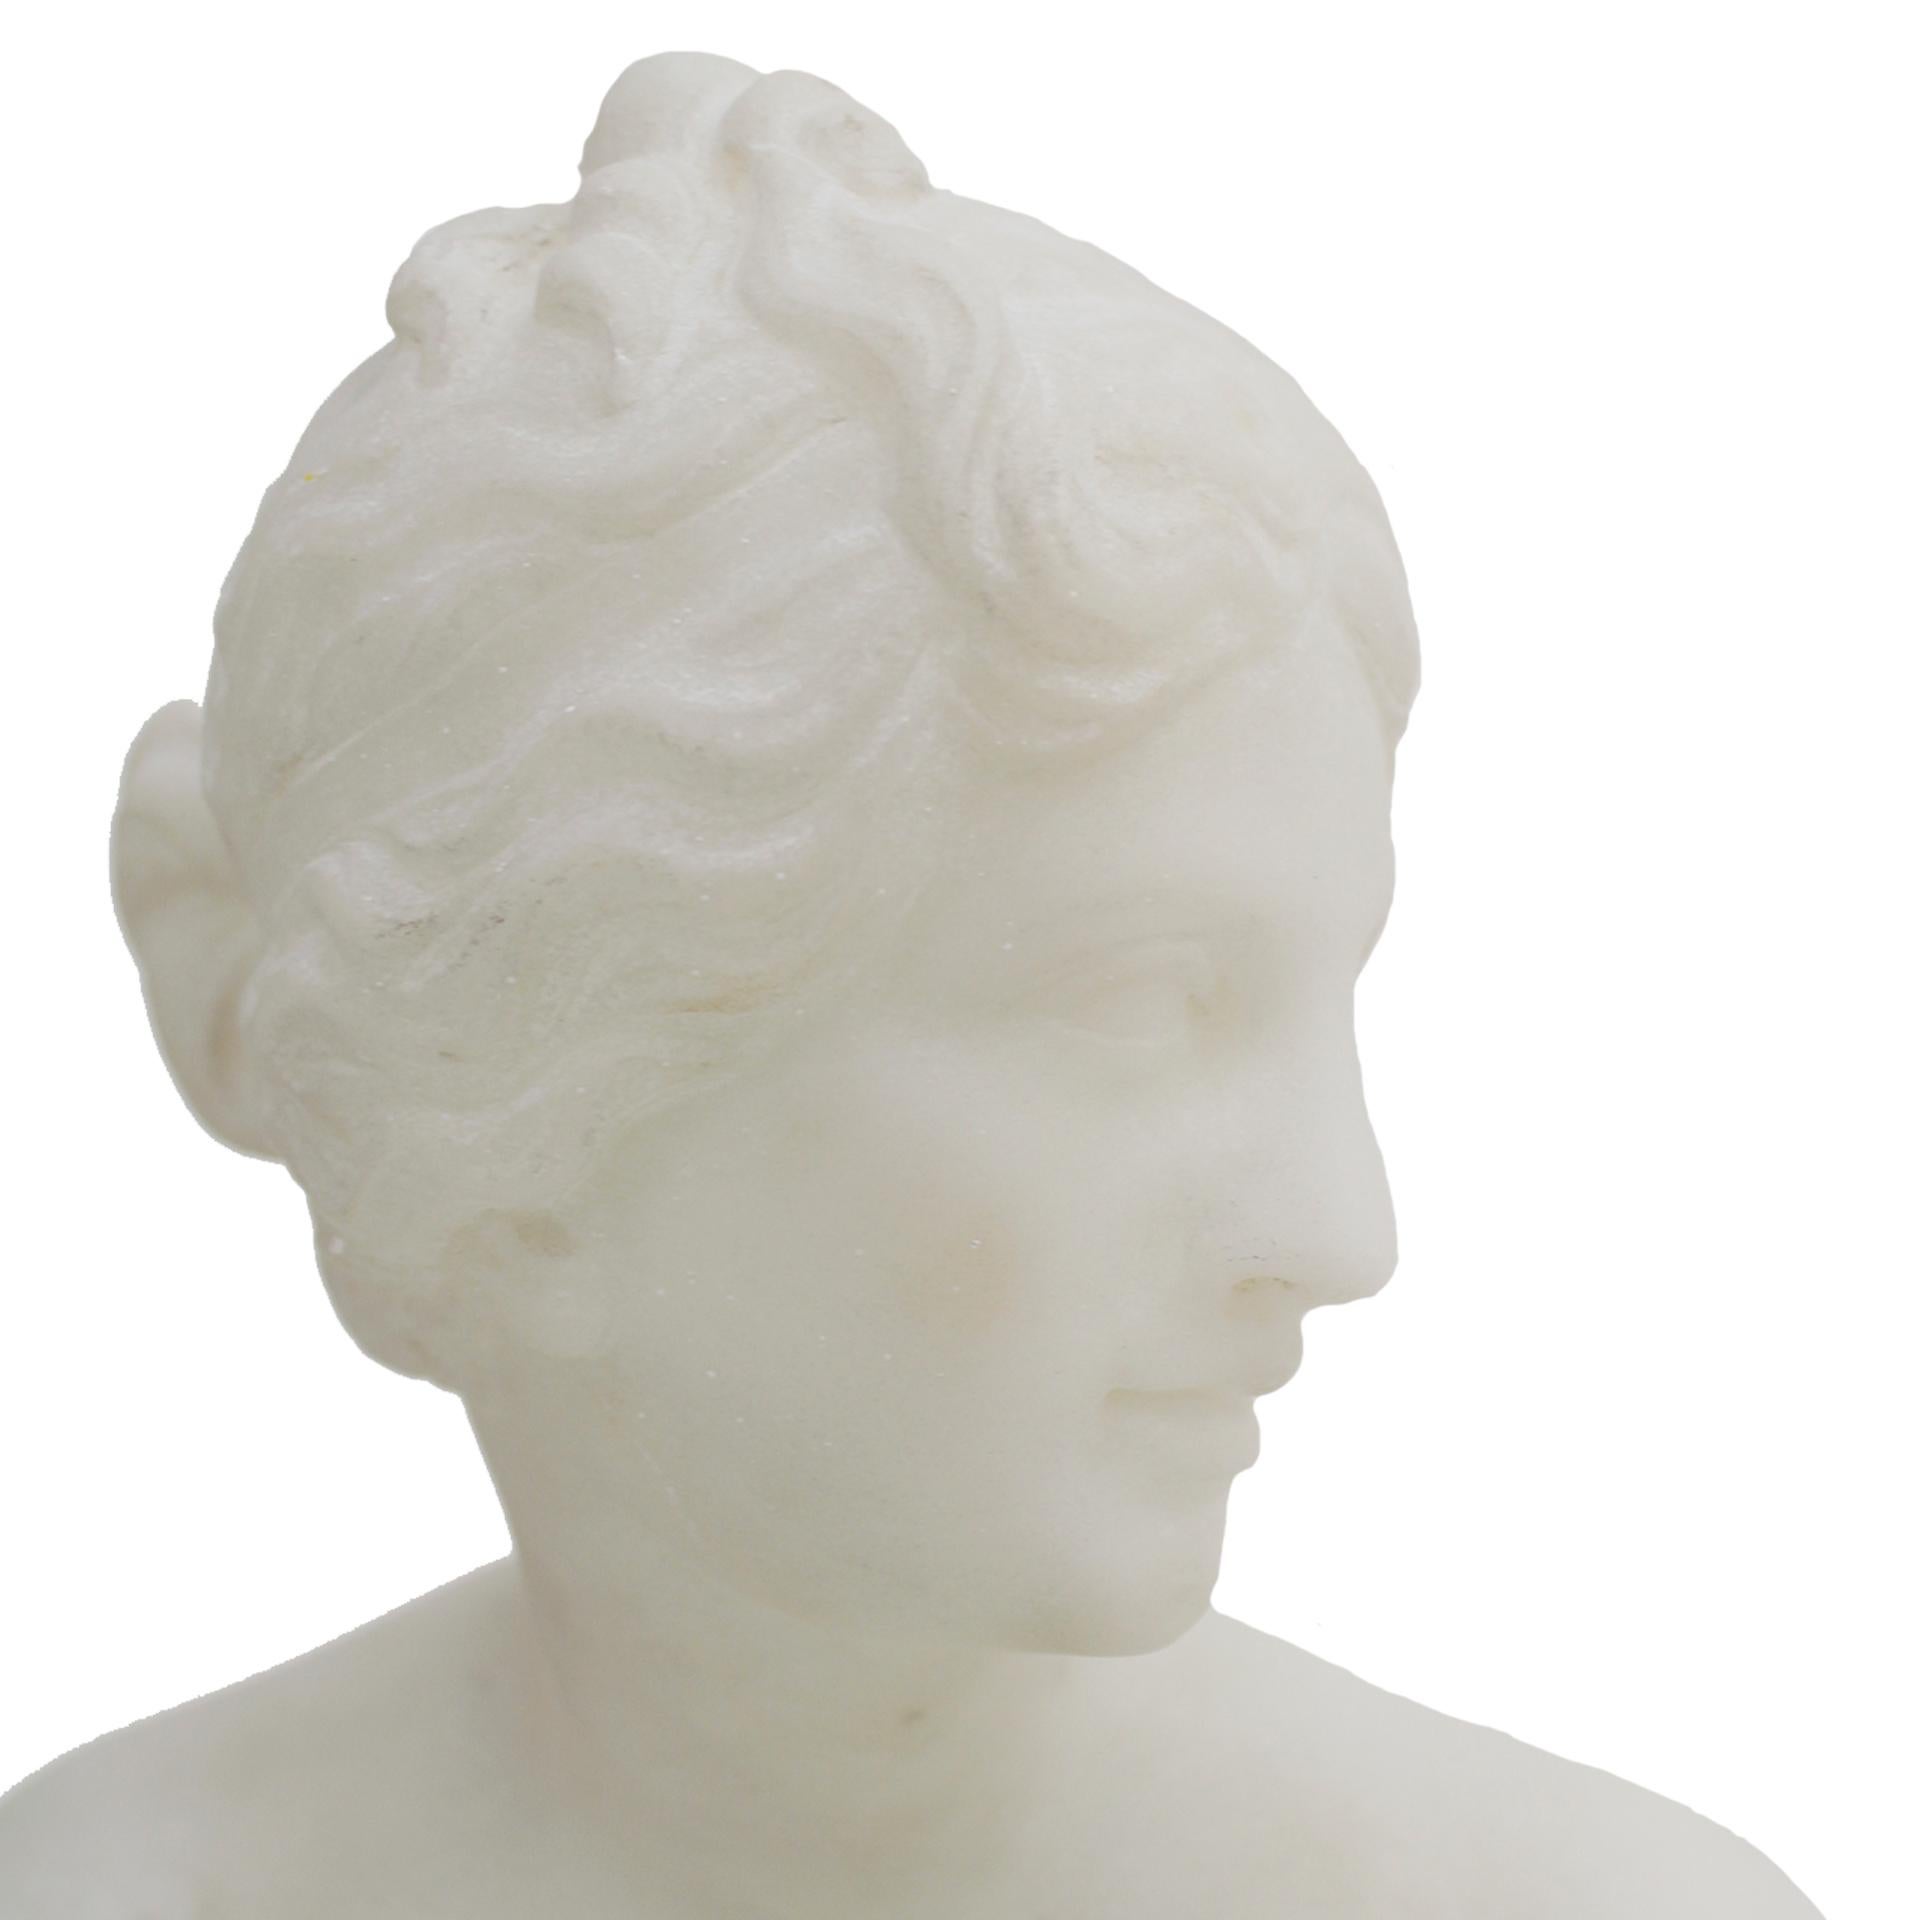 A most elegant Italian 19th century white Carrara marble. This stunning statue depicts the elegant Venus caught in a momentary pose, as if surprised in the act of emerging from the sea, which is represented by the lovely cherubs and dolphins at her